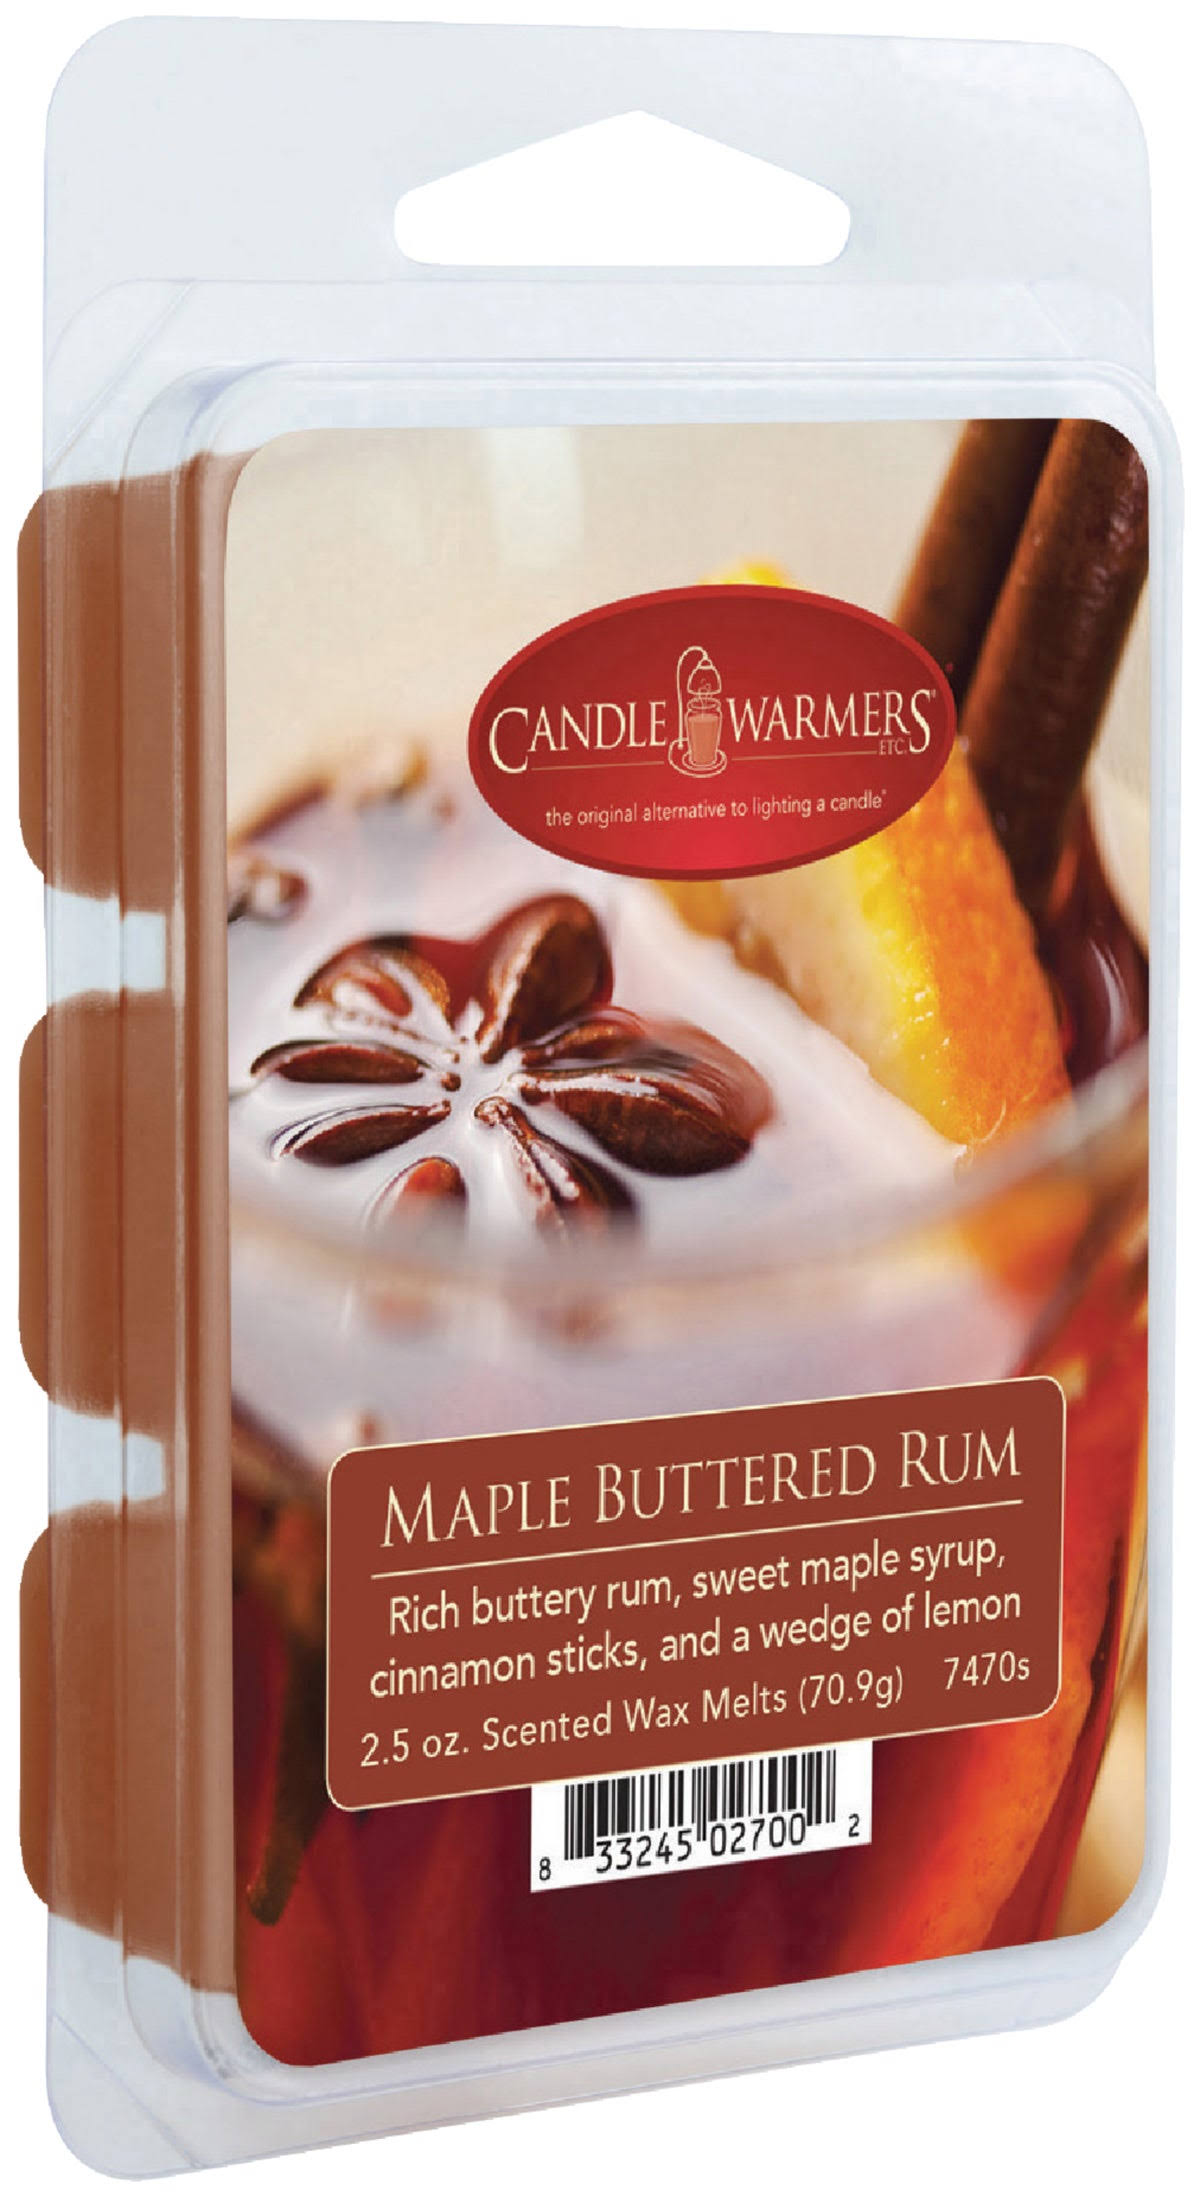 Candle Warmers Maple Buttered Rum Wax Melts - 2.5 Ounces